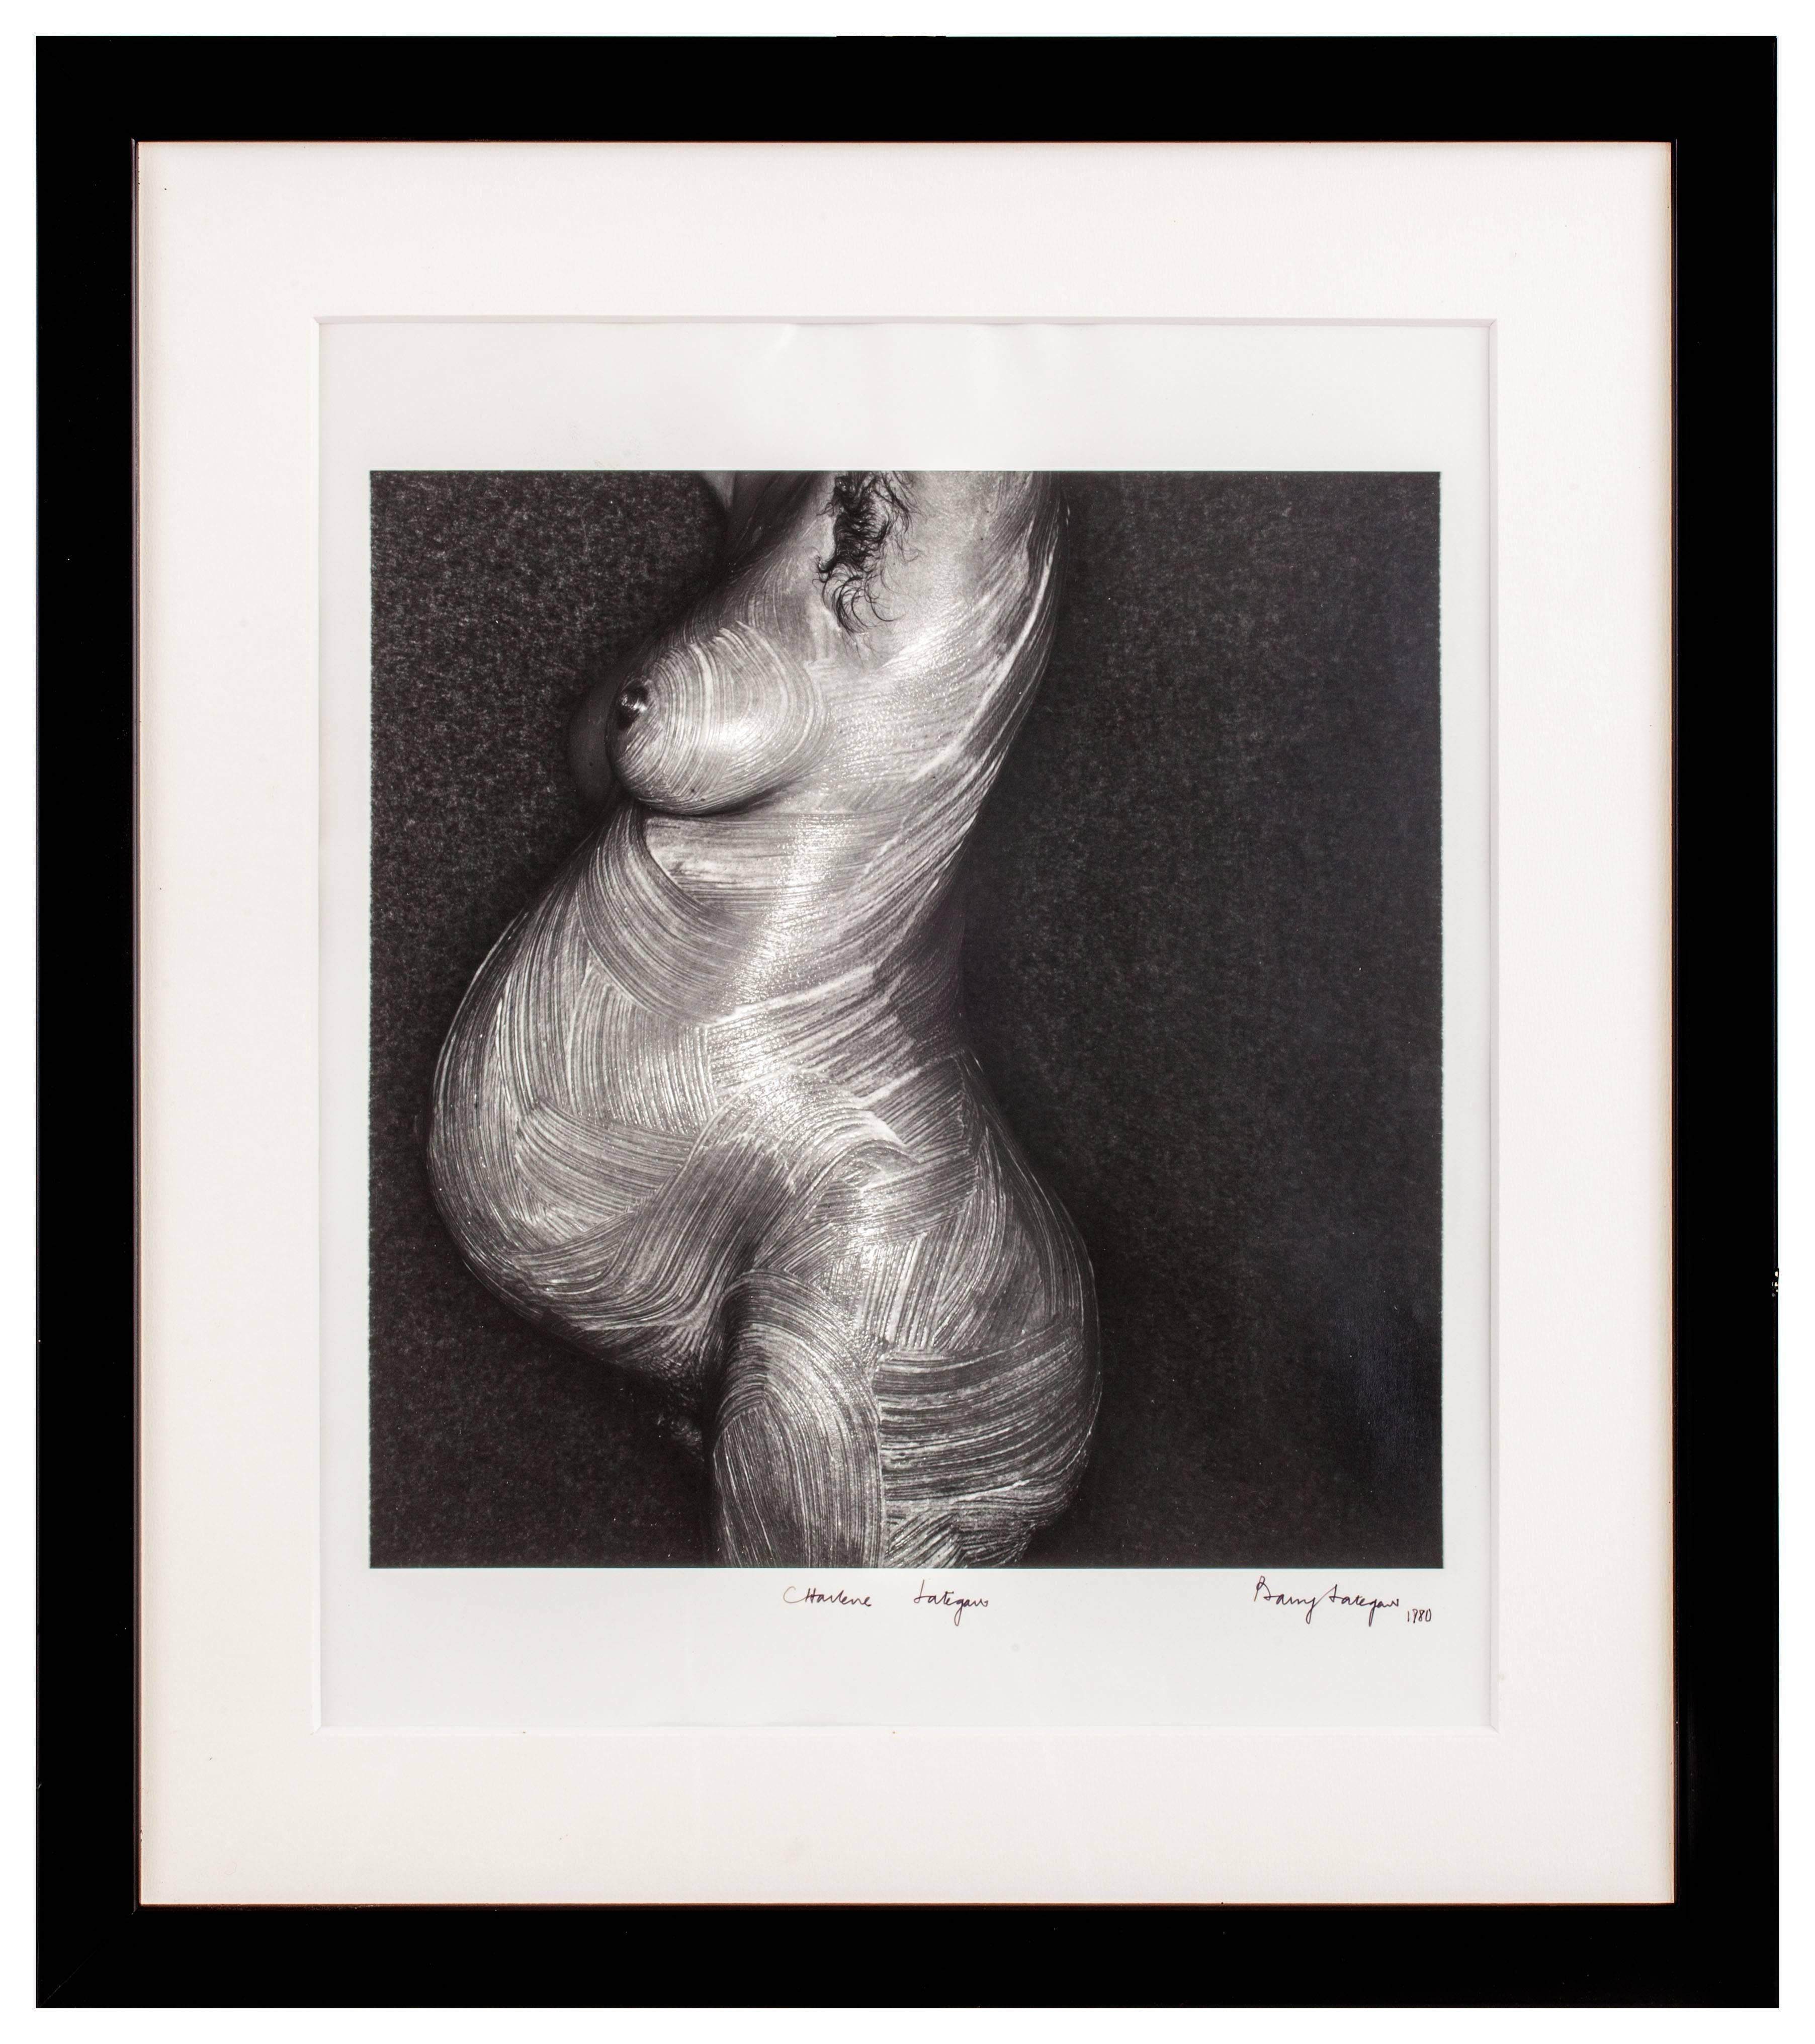 Dimensions:
31 x 30.2
55,7 x 49.3 with frame
Signed, titled and dated (recto)
Fashion Photography

Lategan was born in South Africa in 1935 and came to England to study at the Bristol Old Vic Theatre School. His study was interrupted by a call to